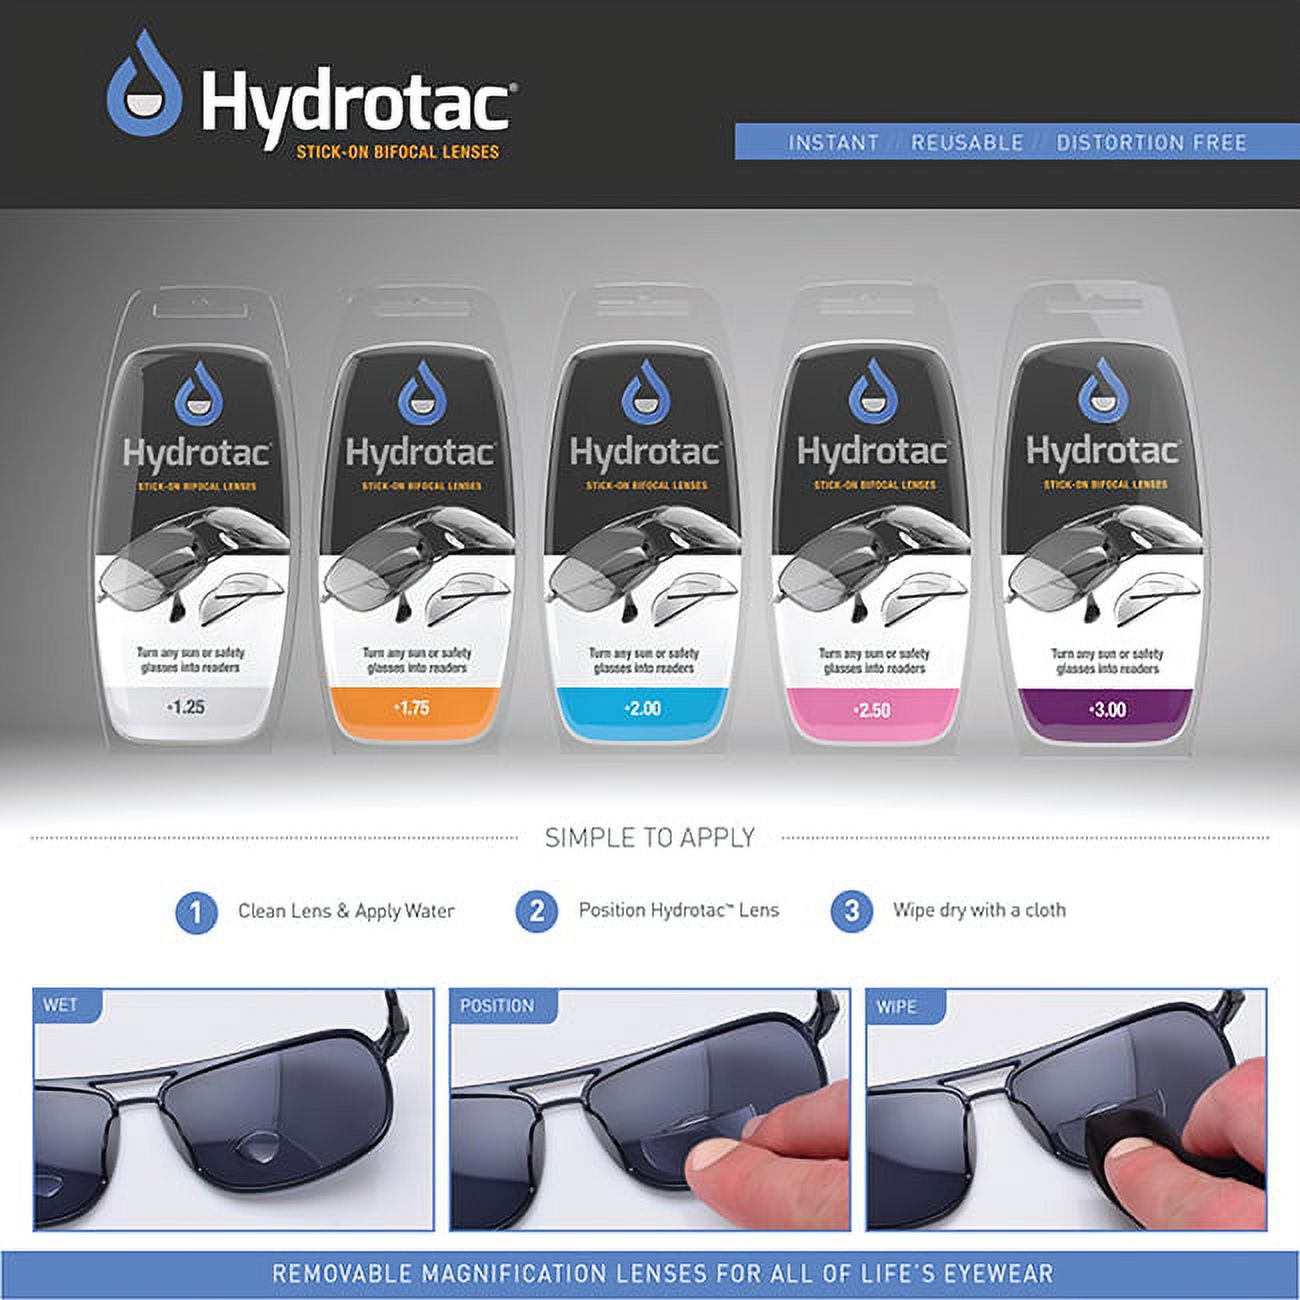 Hydrotac Stick-on Bifocal Lenses (OPTX 20/20)- +1.75 Diopter - image 2 of 2